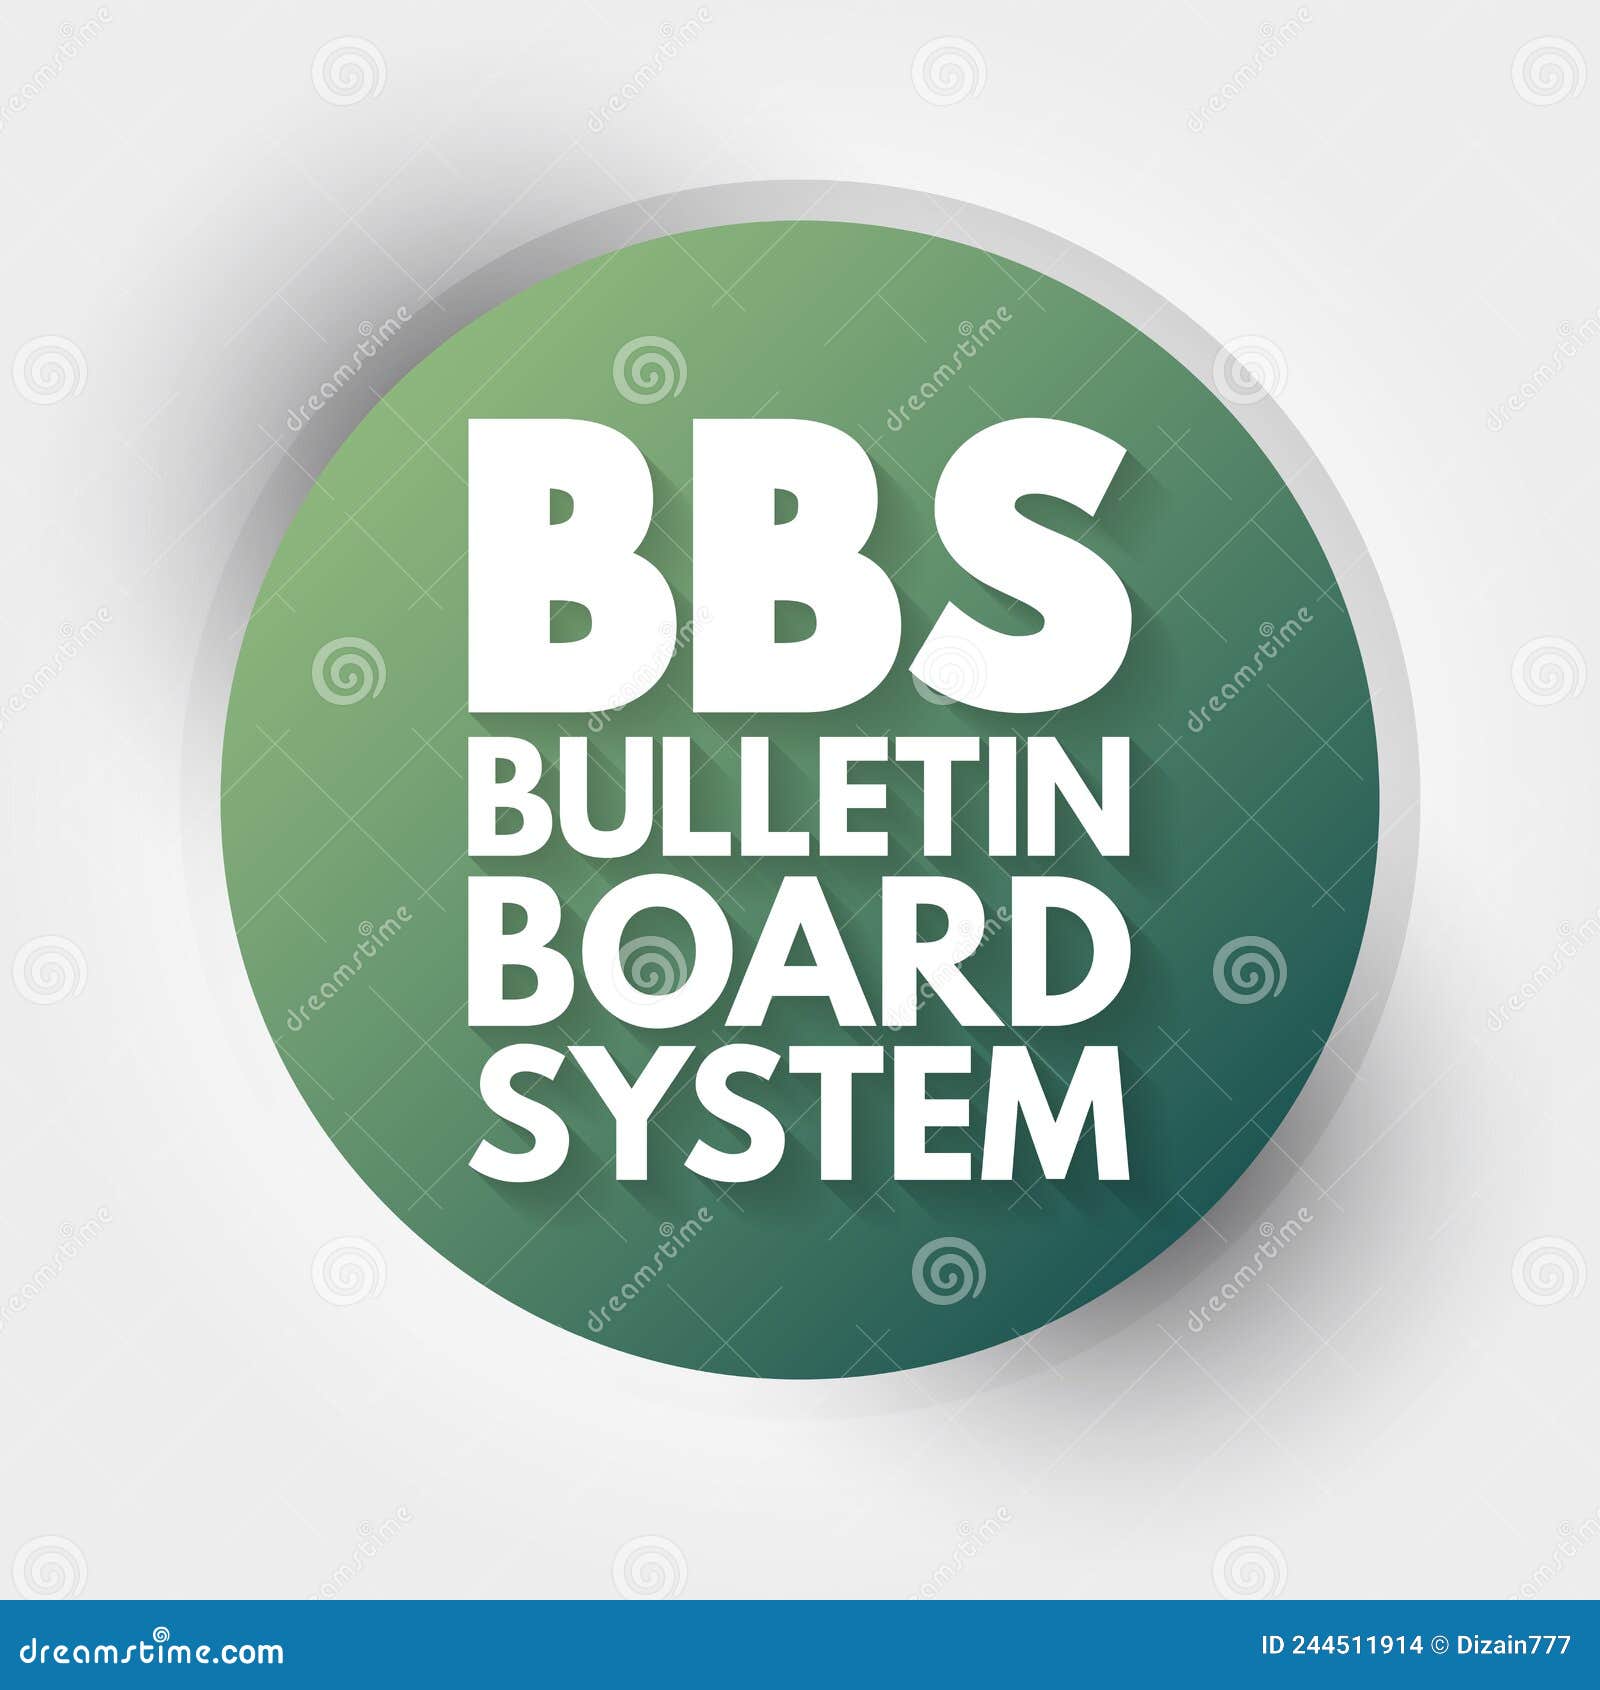 bbs - bulletin board system acronym, technology concept background